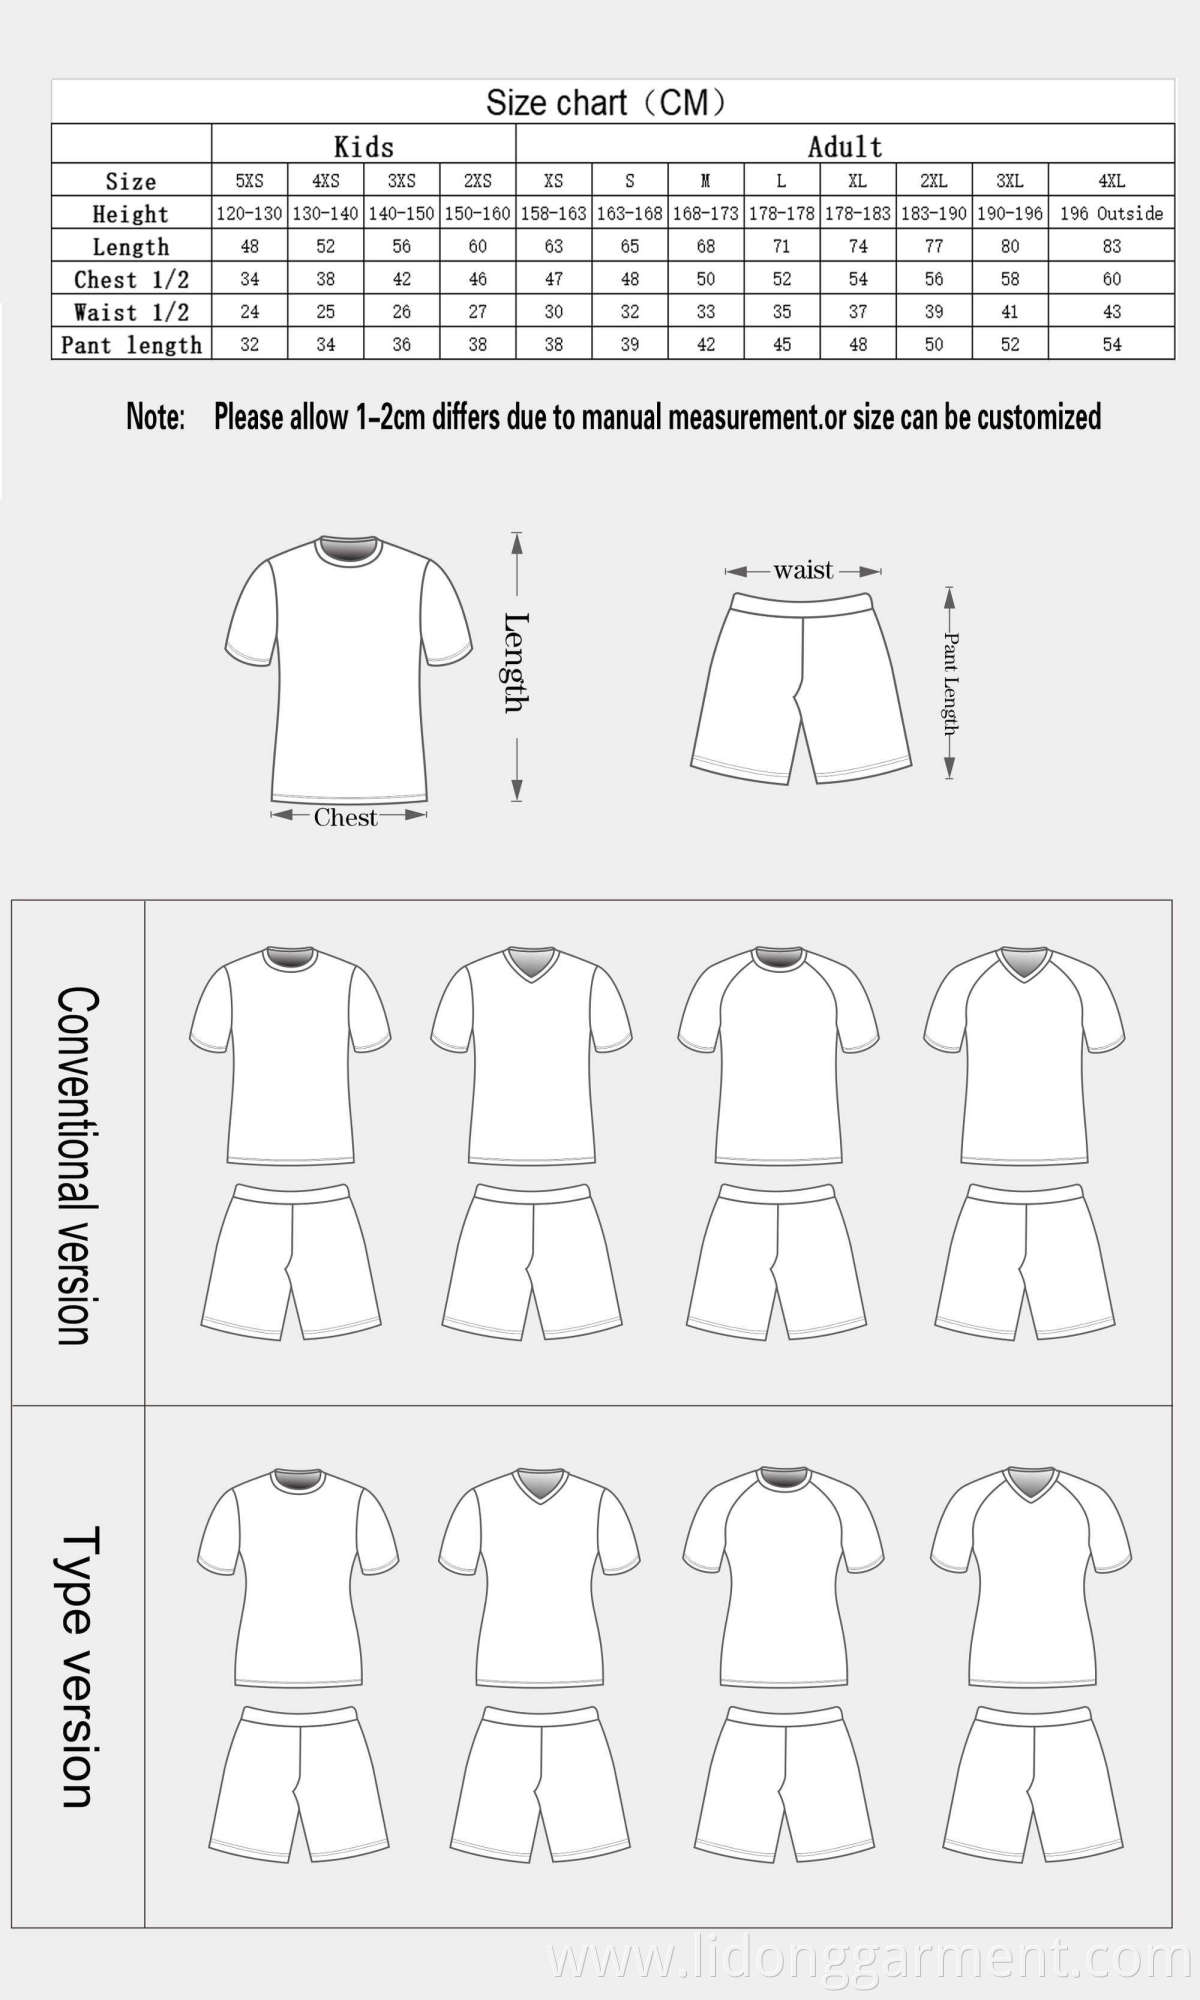 New Arrivals Soccer Training Jersey Wholesale Blank Soccer Jersey For School